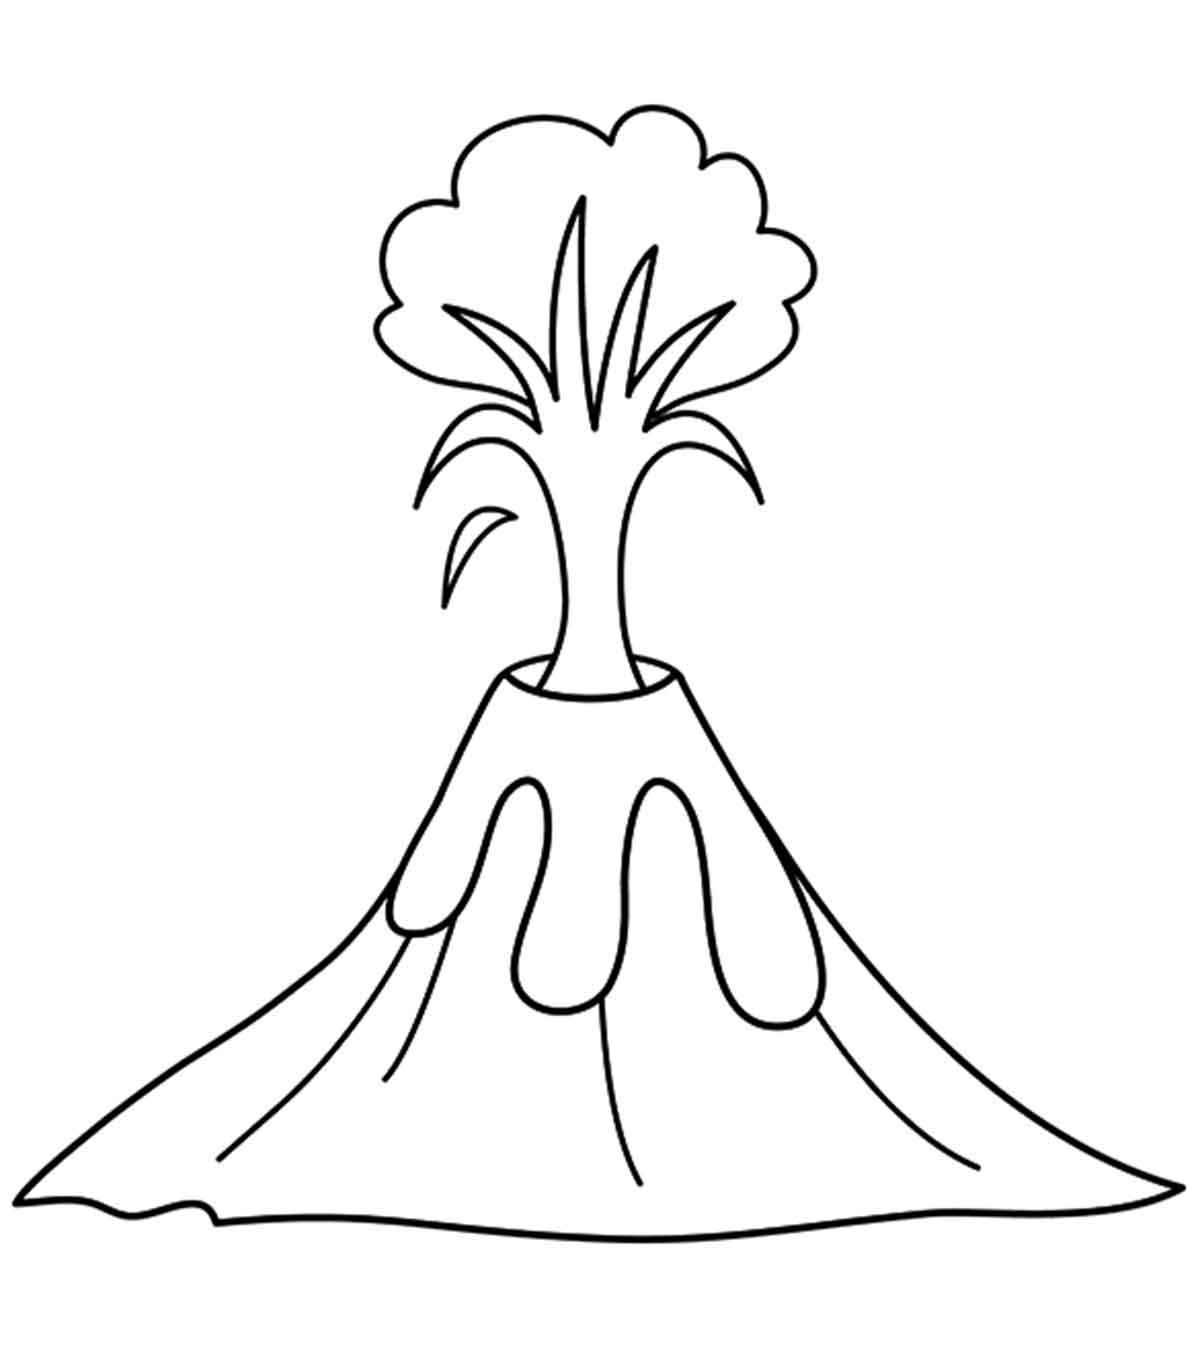 Top 10 Free Printable Volcano Coloring Pages Online